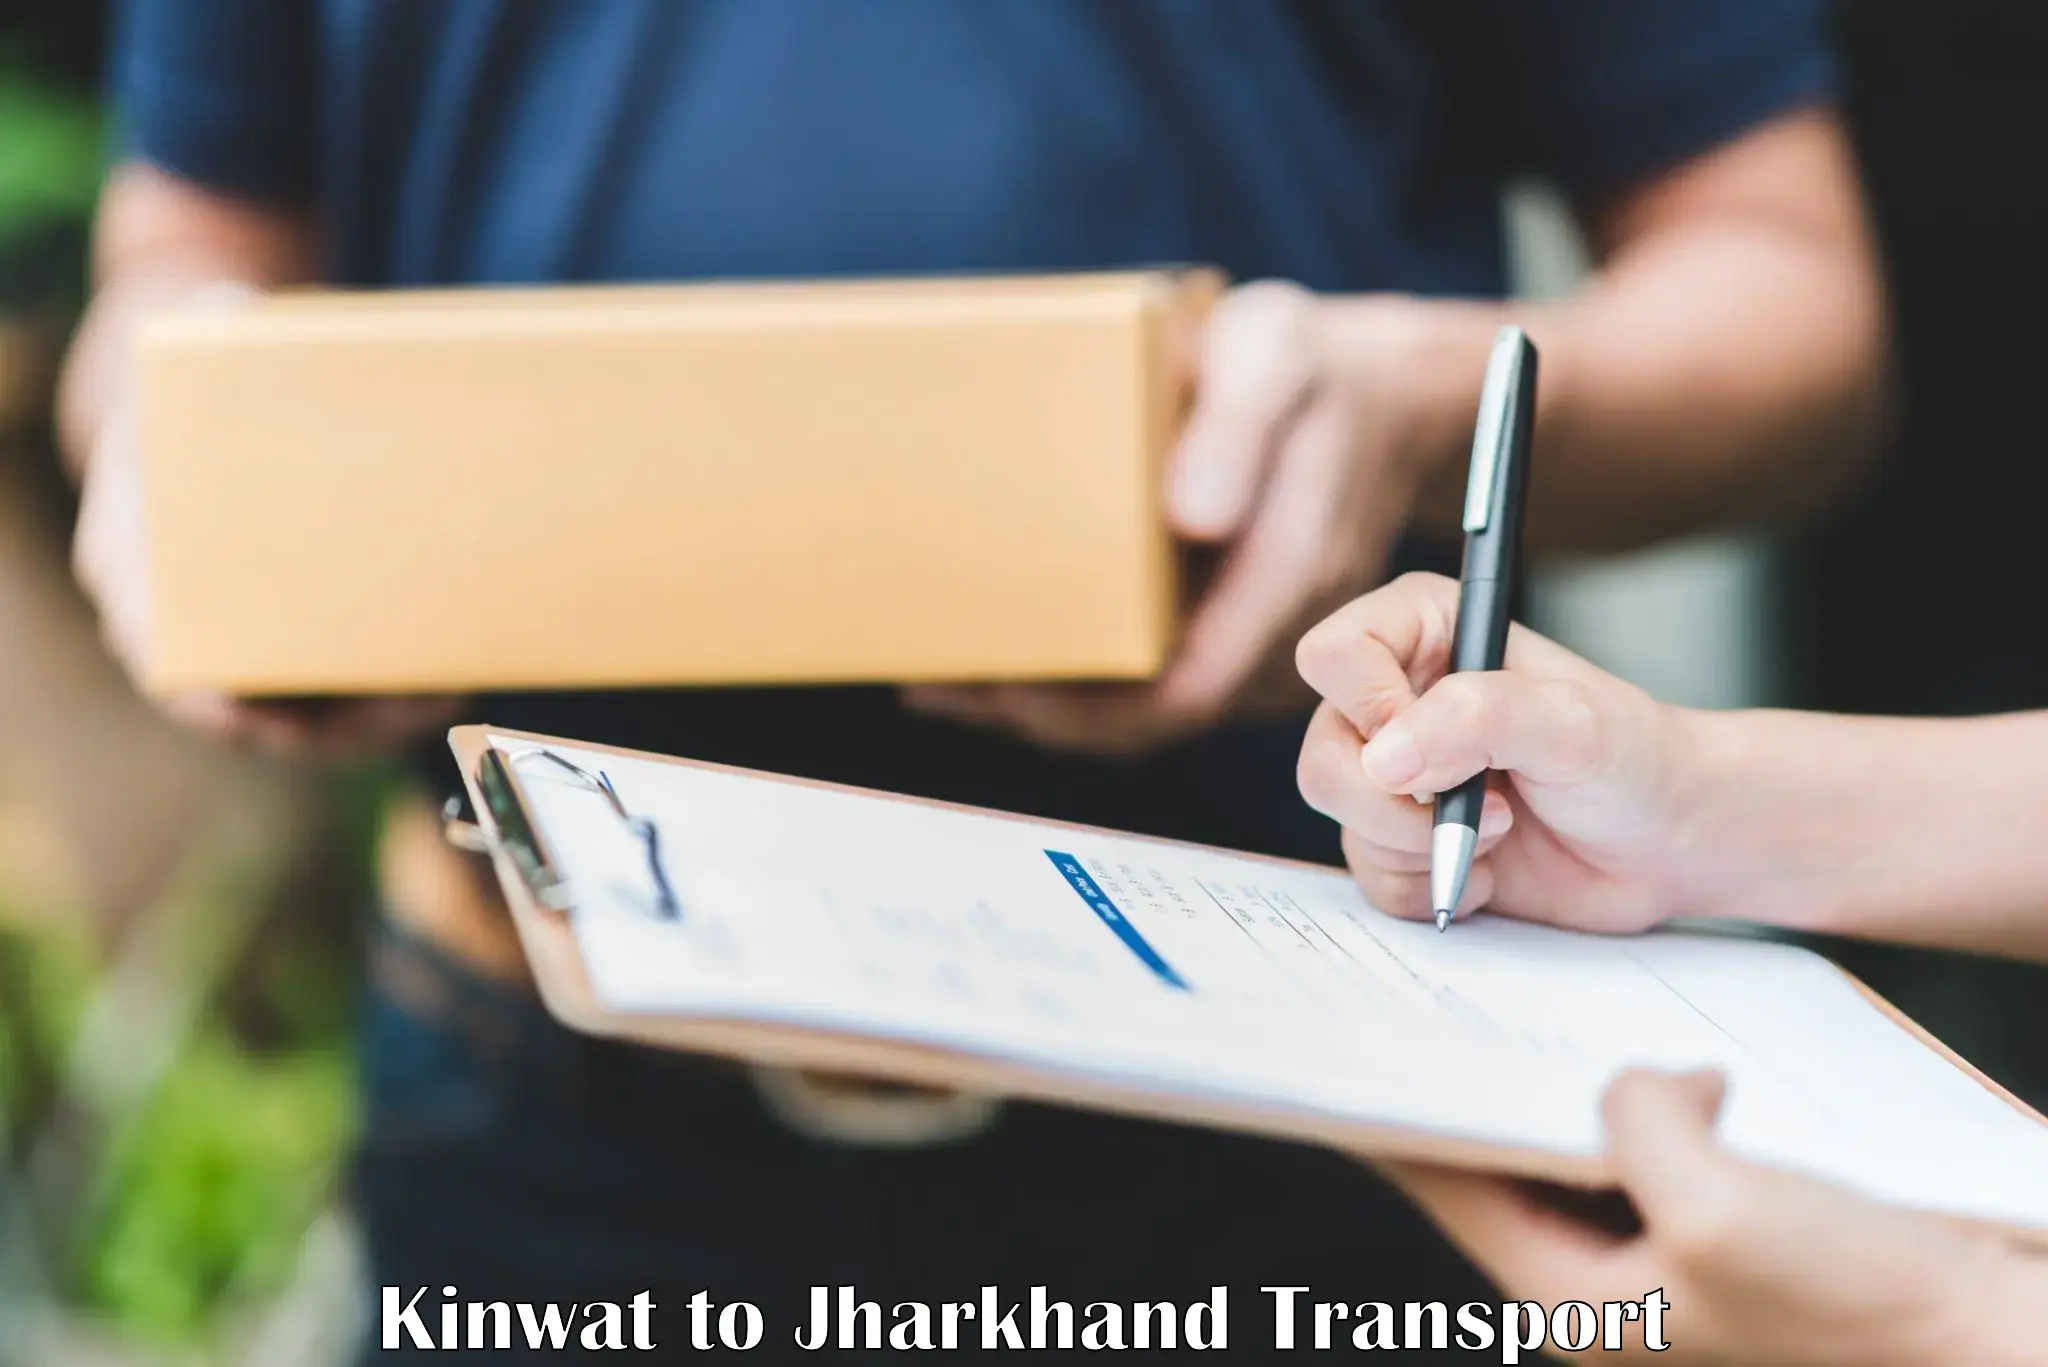 Road transport services in Kinwat to Jamshedpur